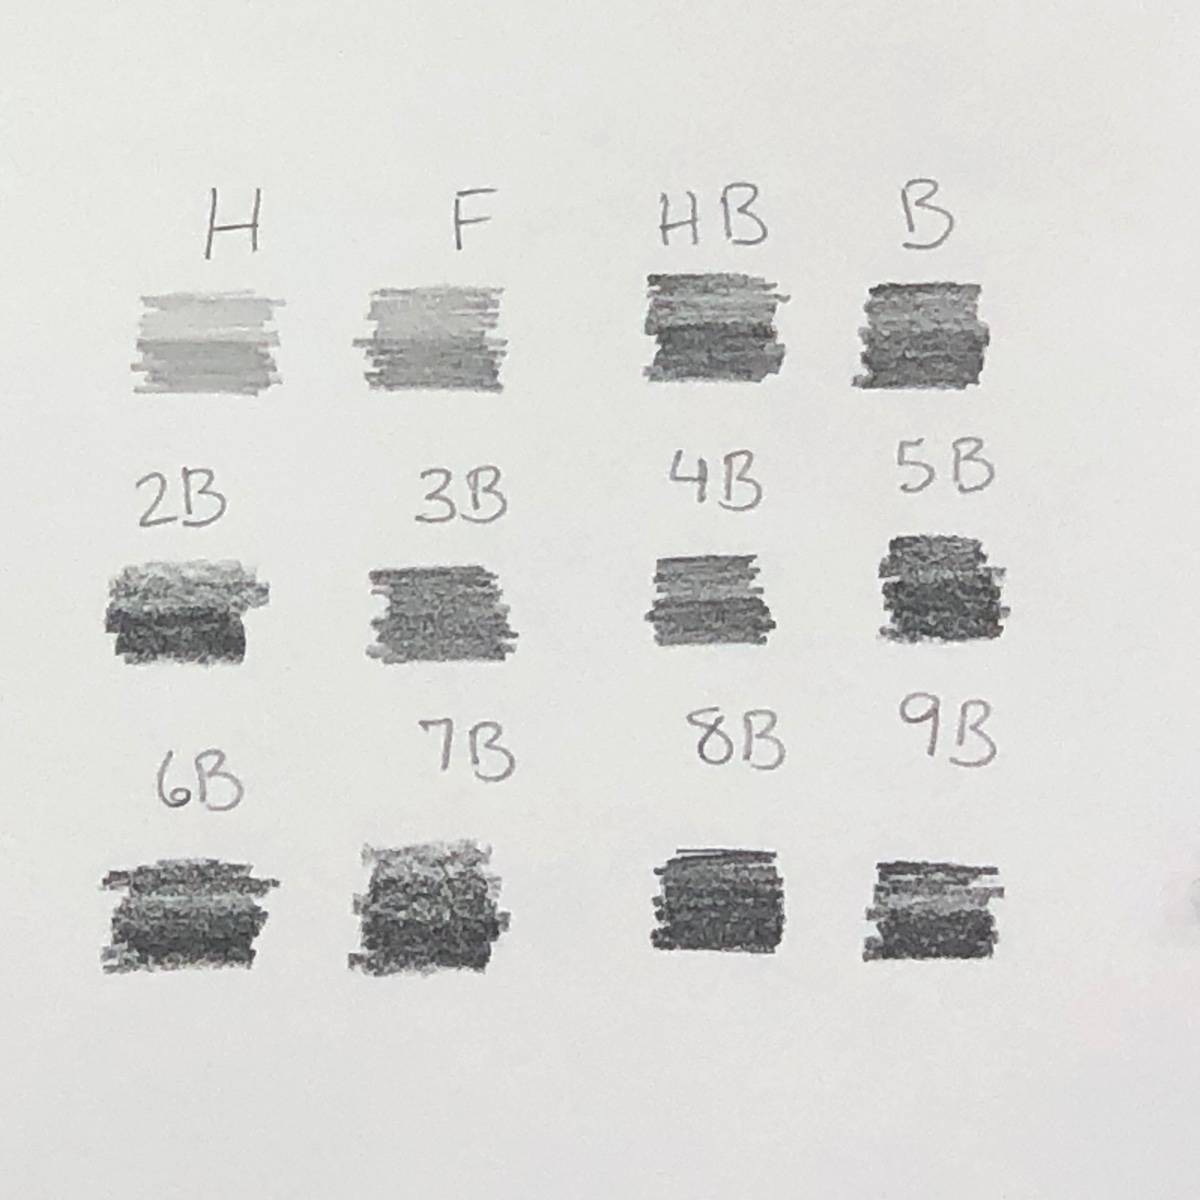 Swatches of different grades of artist drawing pencils sketched, including H, F, HB, B, 2B through 9B.